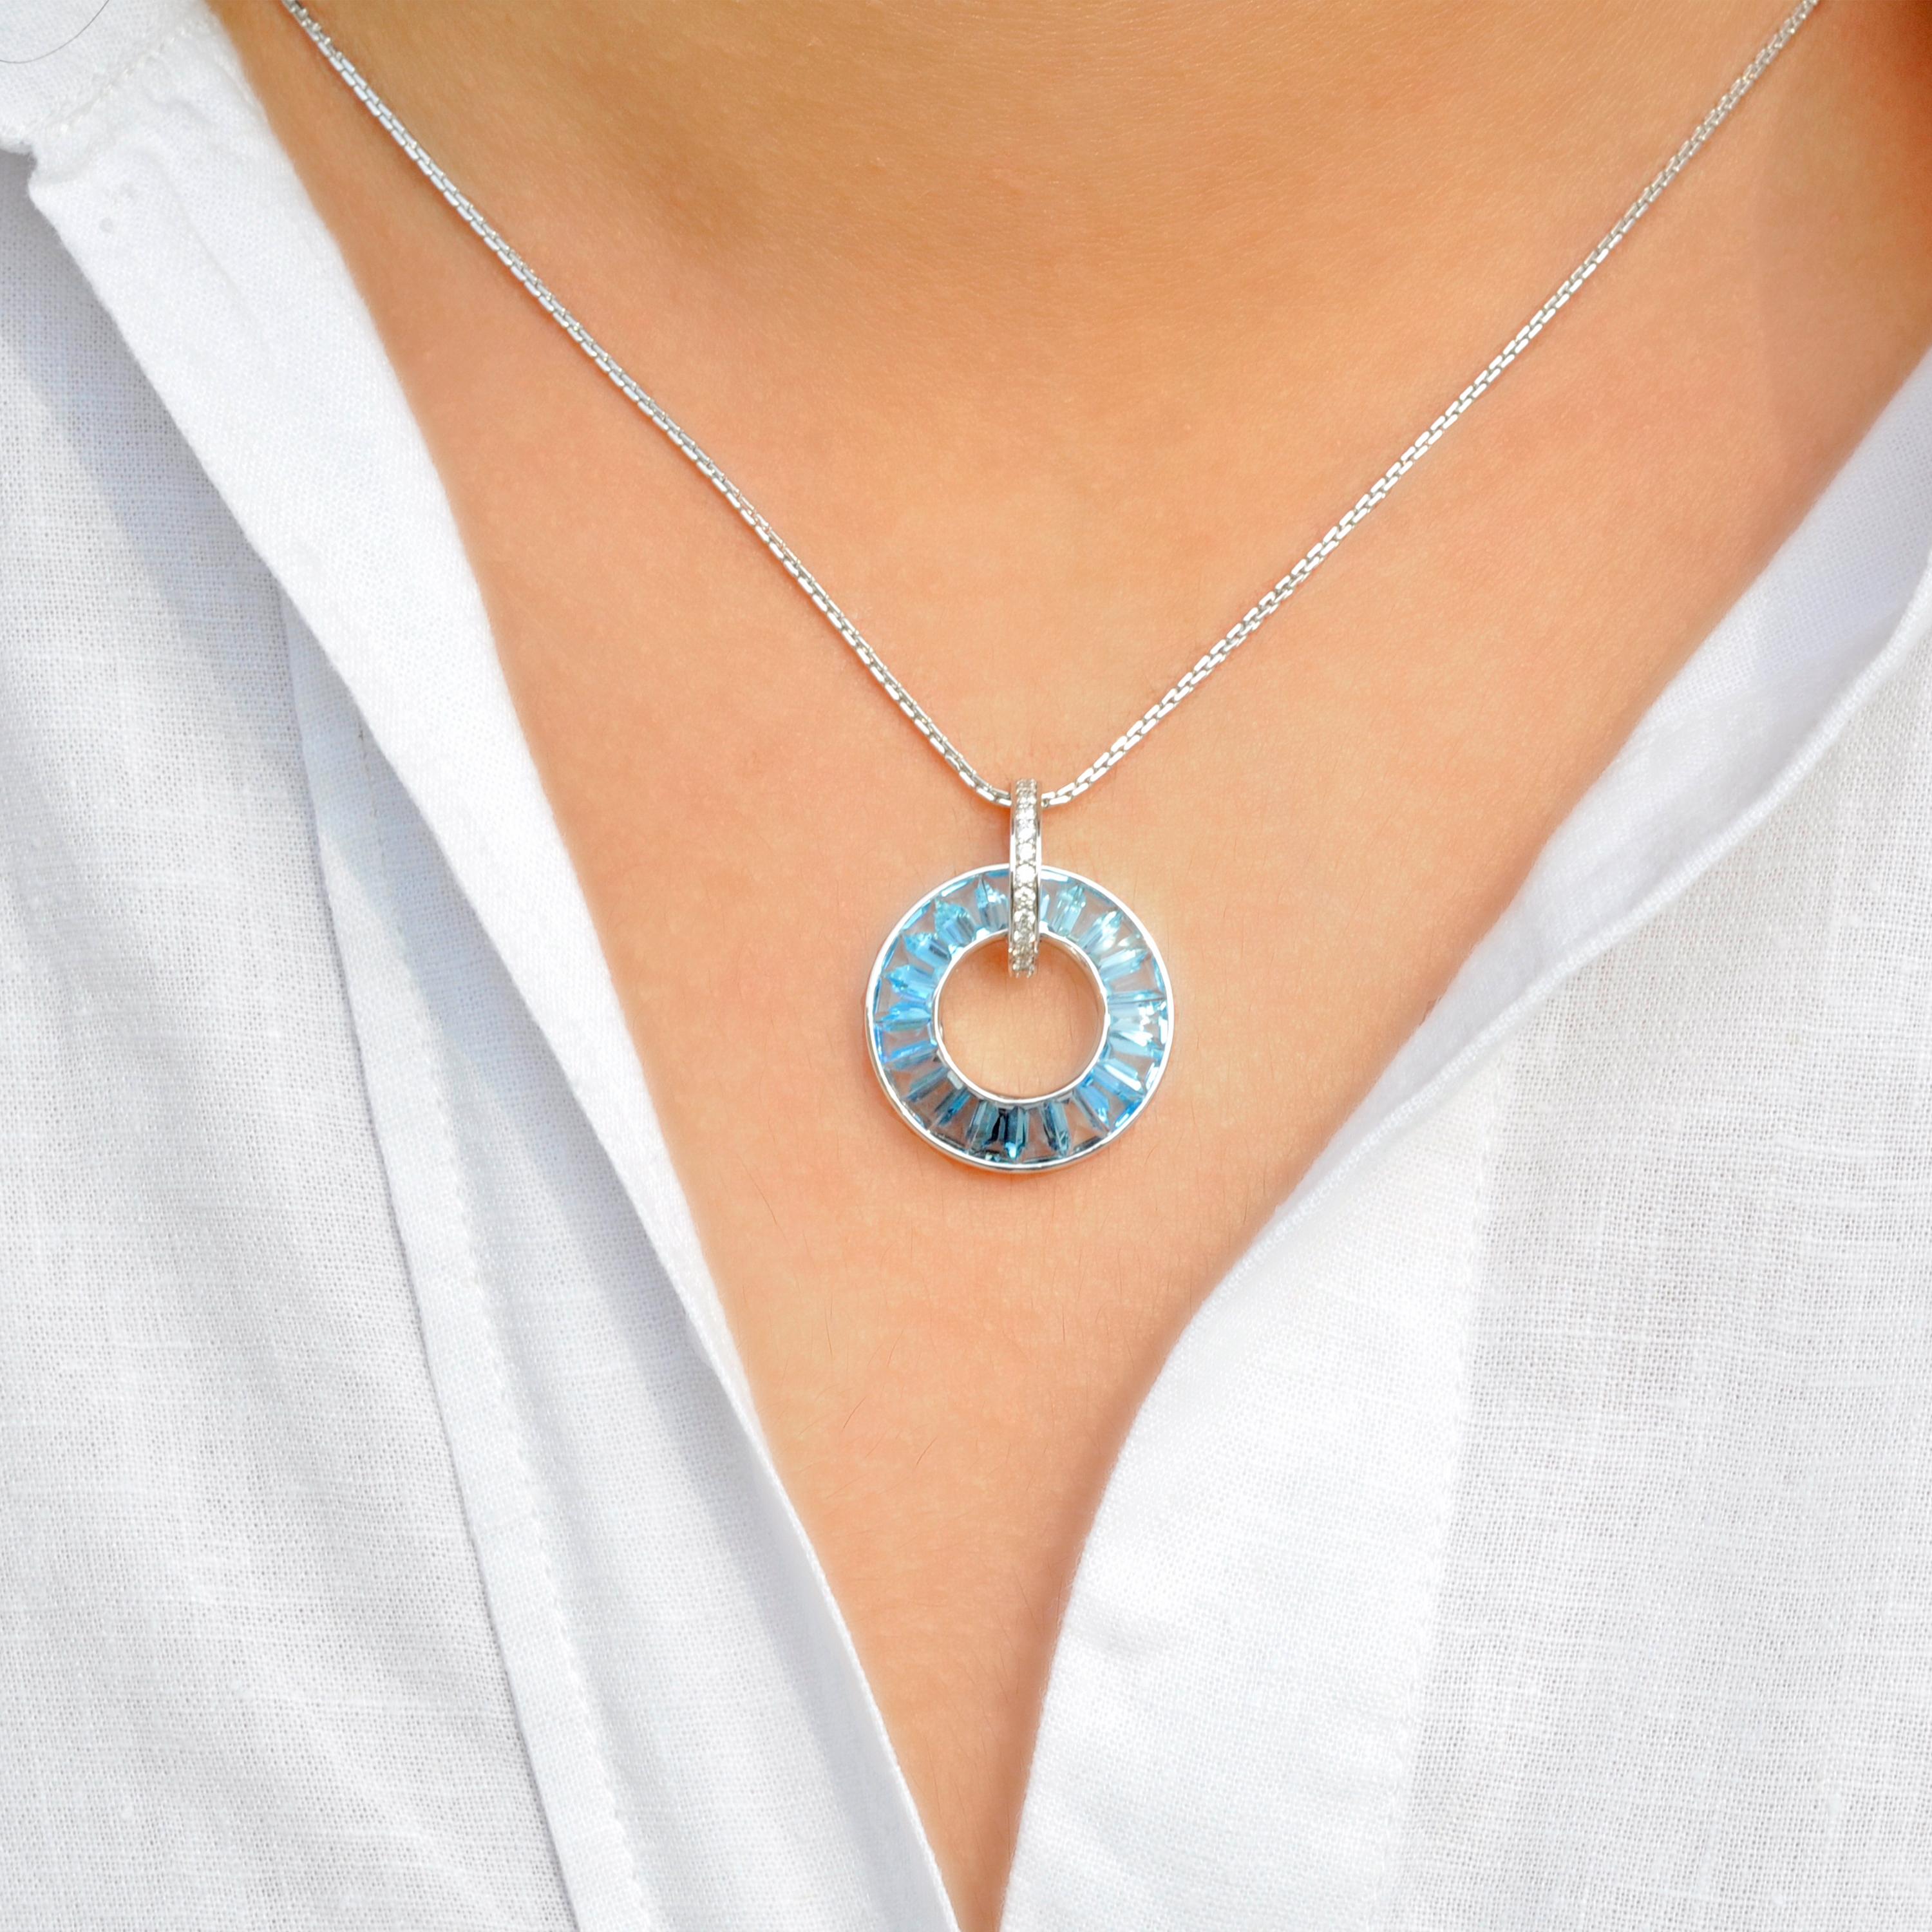 This 18K White Gold Blue Topaz Diamond Circle Pendant is a stunning embodiment of grace and sophistication. Crafted in luminous white gold, this pendant features a captivating circle adorned with the enchanting beauty of blue topaz gemstones.

The